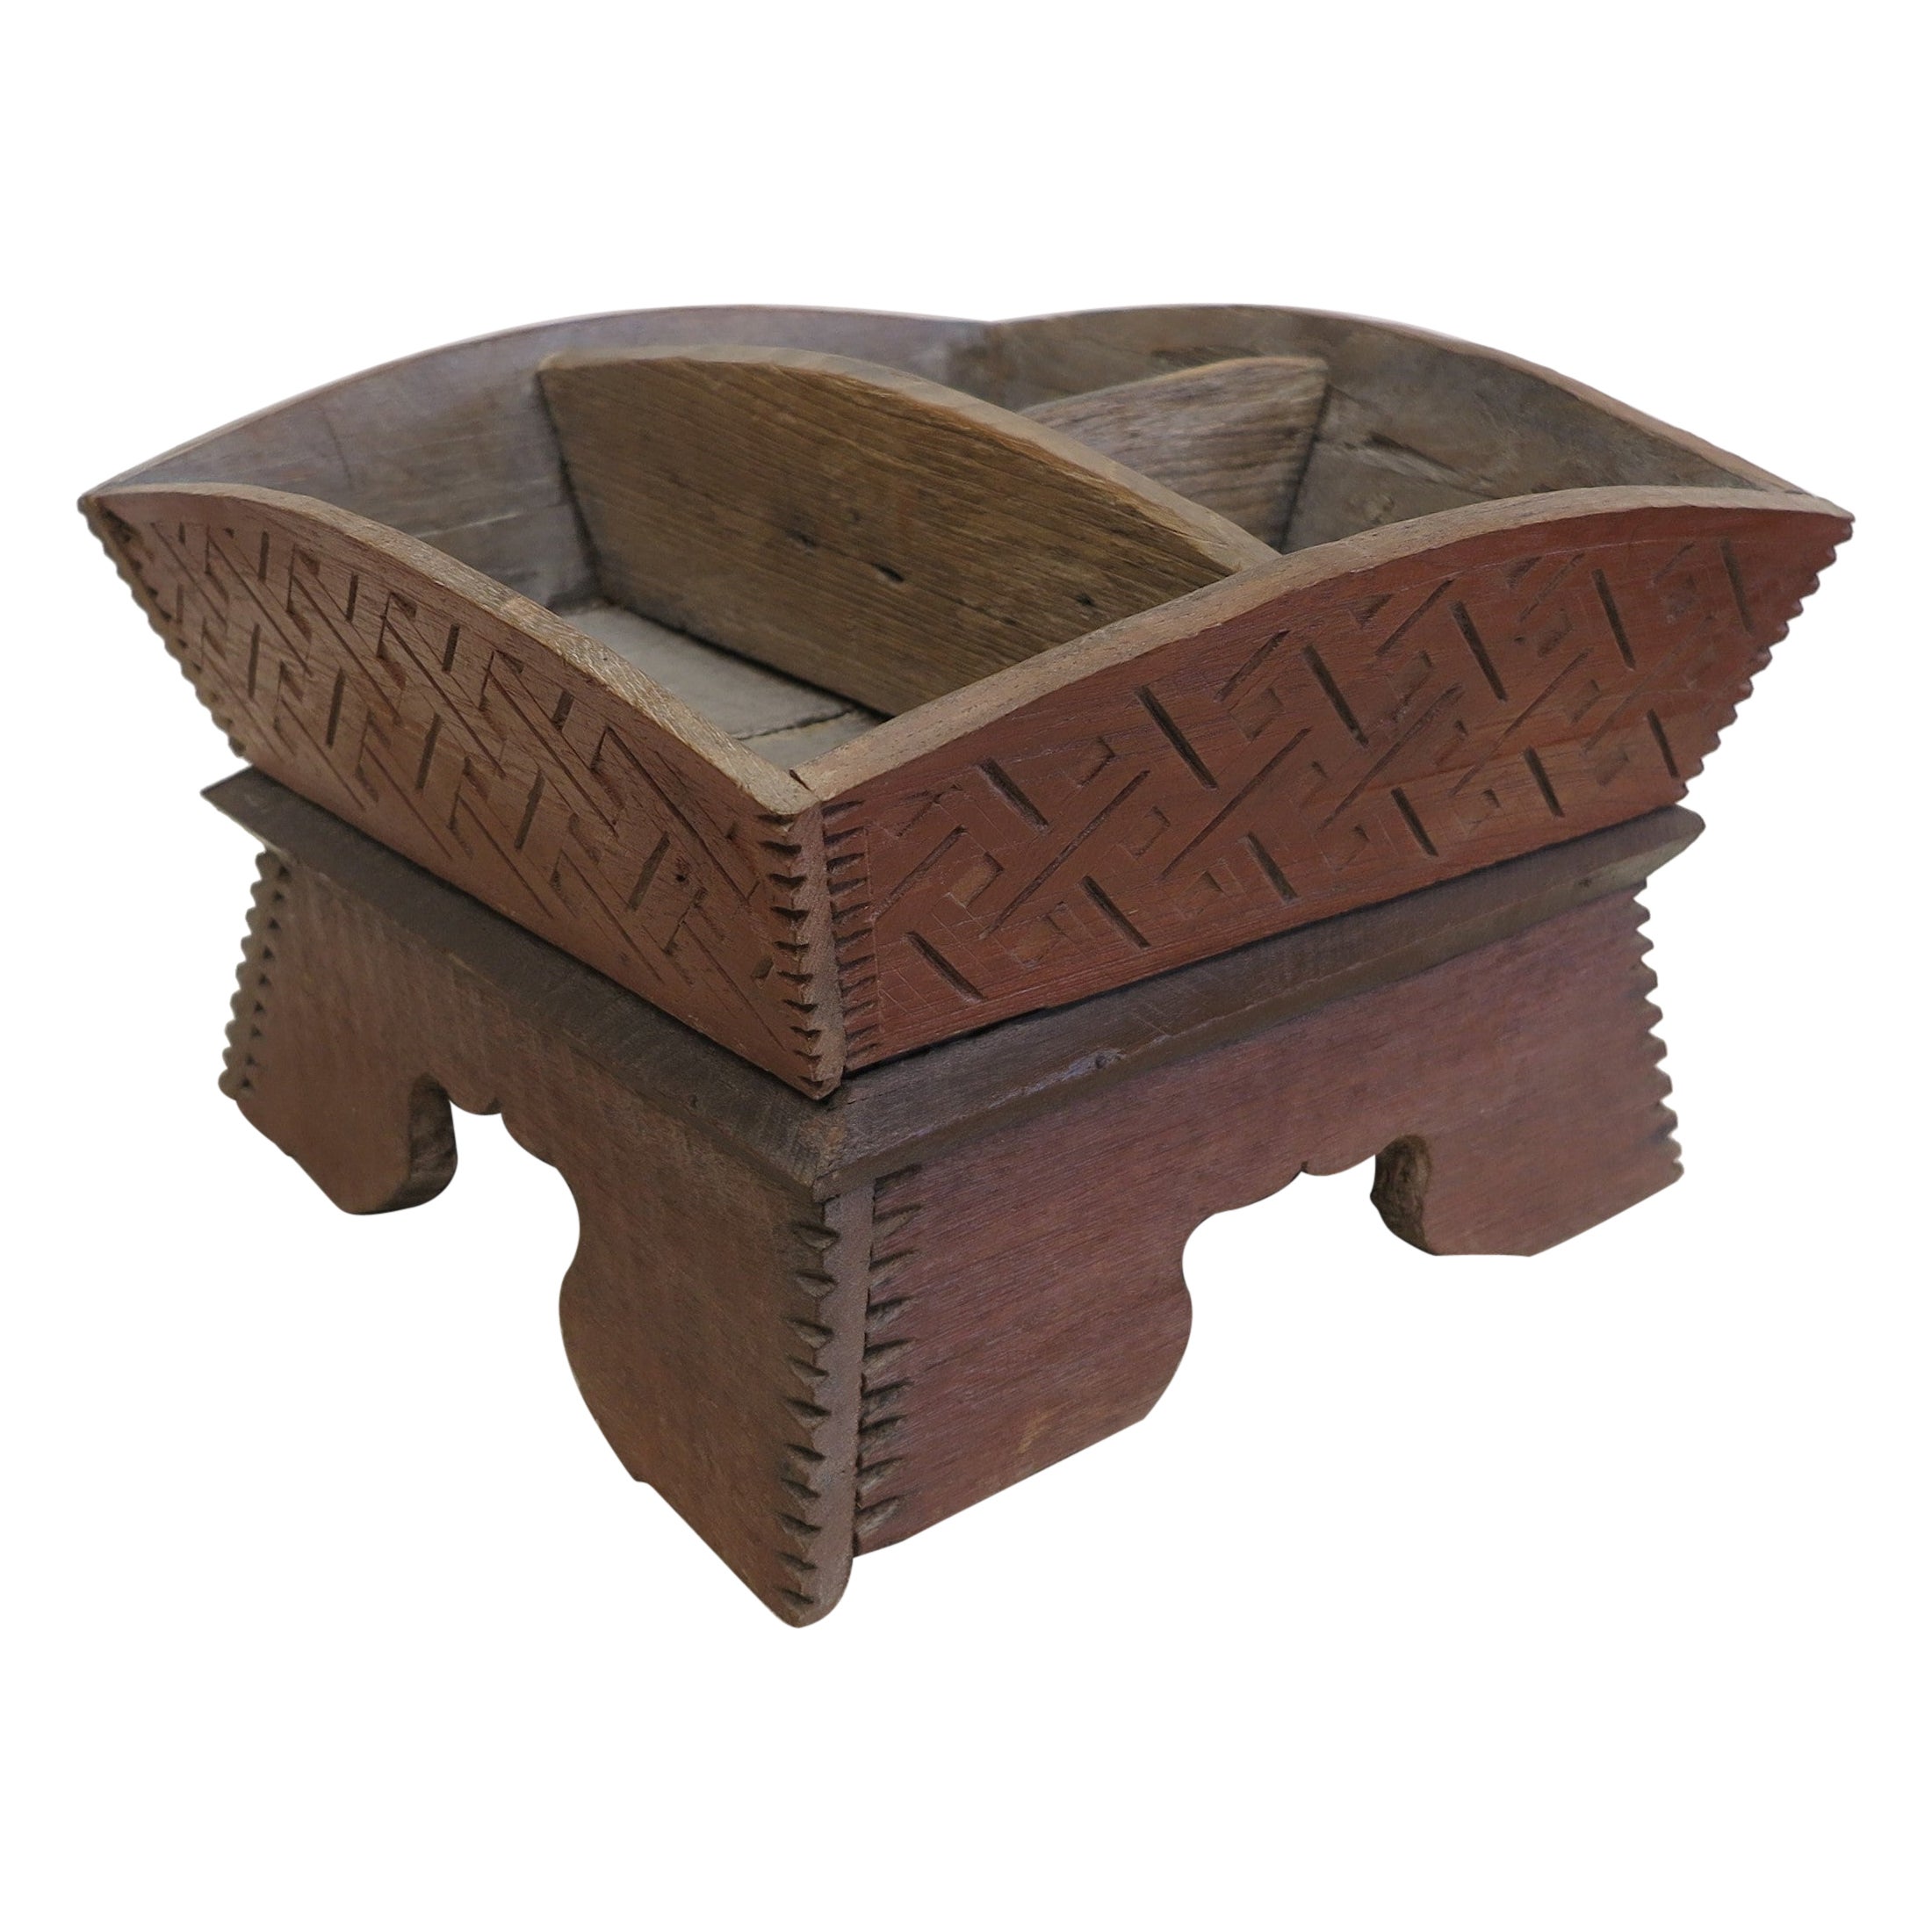 Hill Tribe Betel Nut Box For Sale